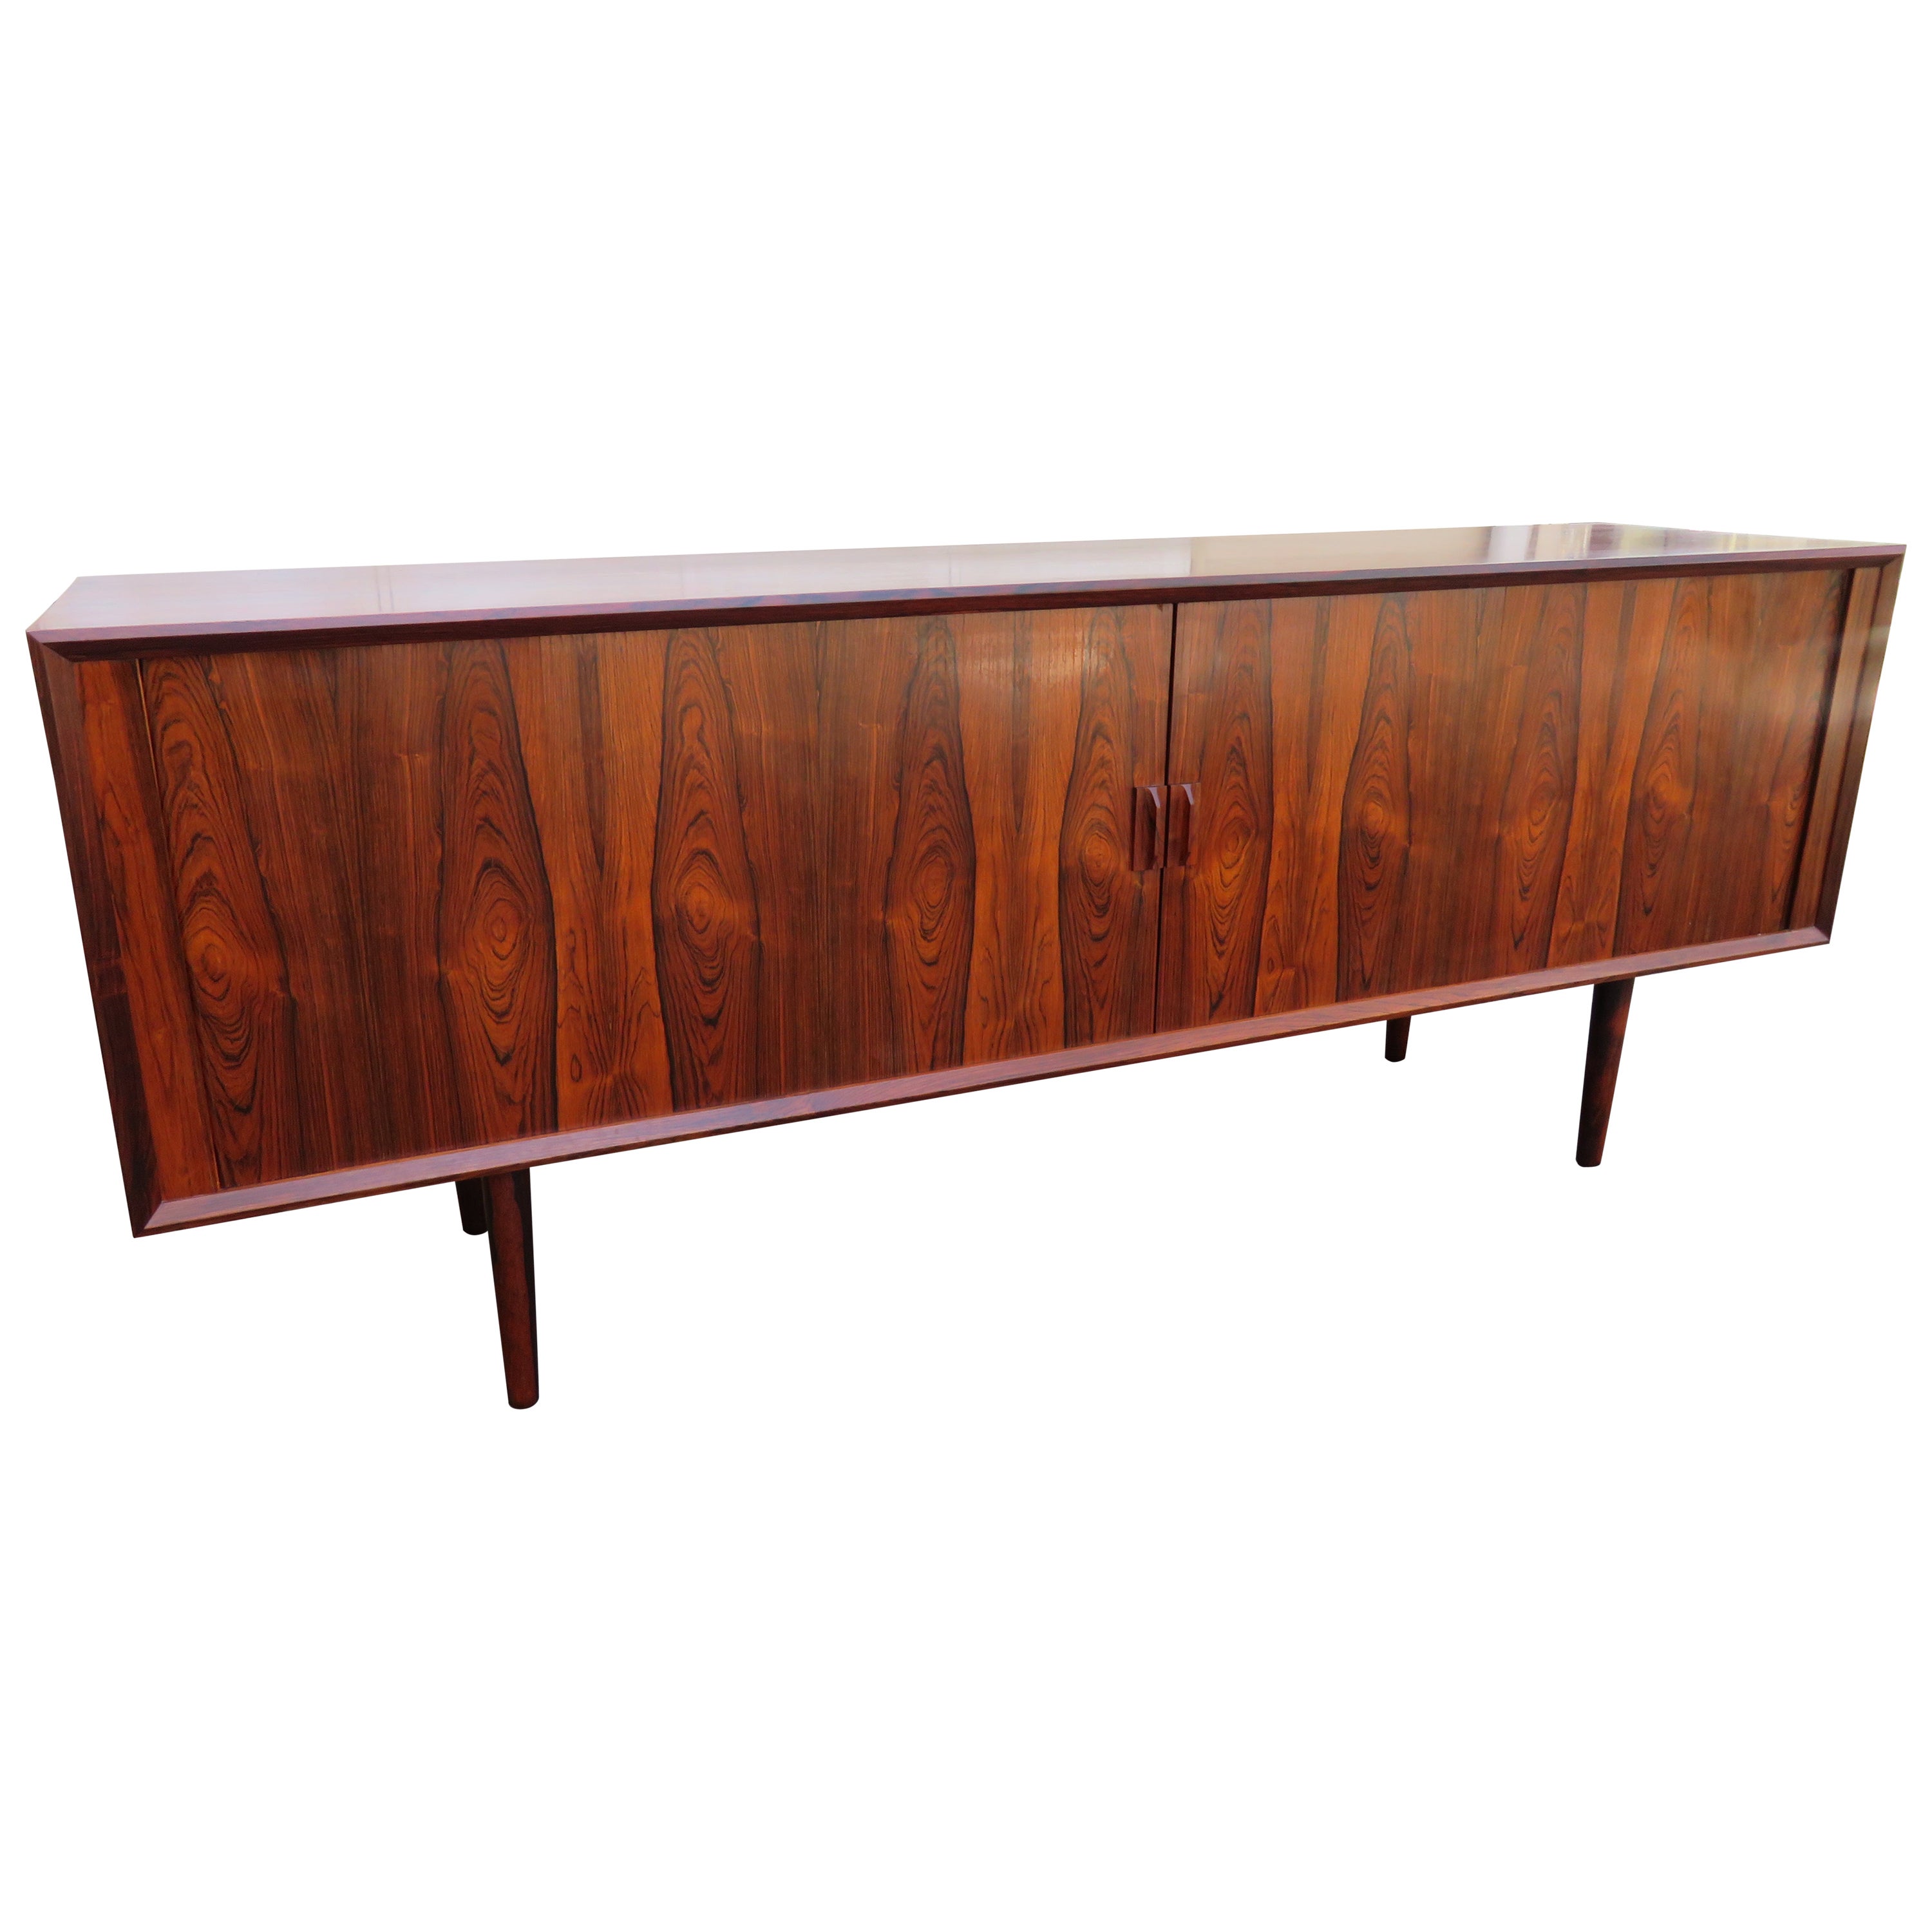 Magnificent Ib Kofod-Larsen Brazilian Rosewood Credenza for Faarup